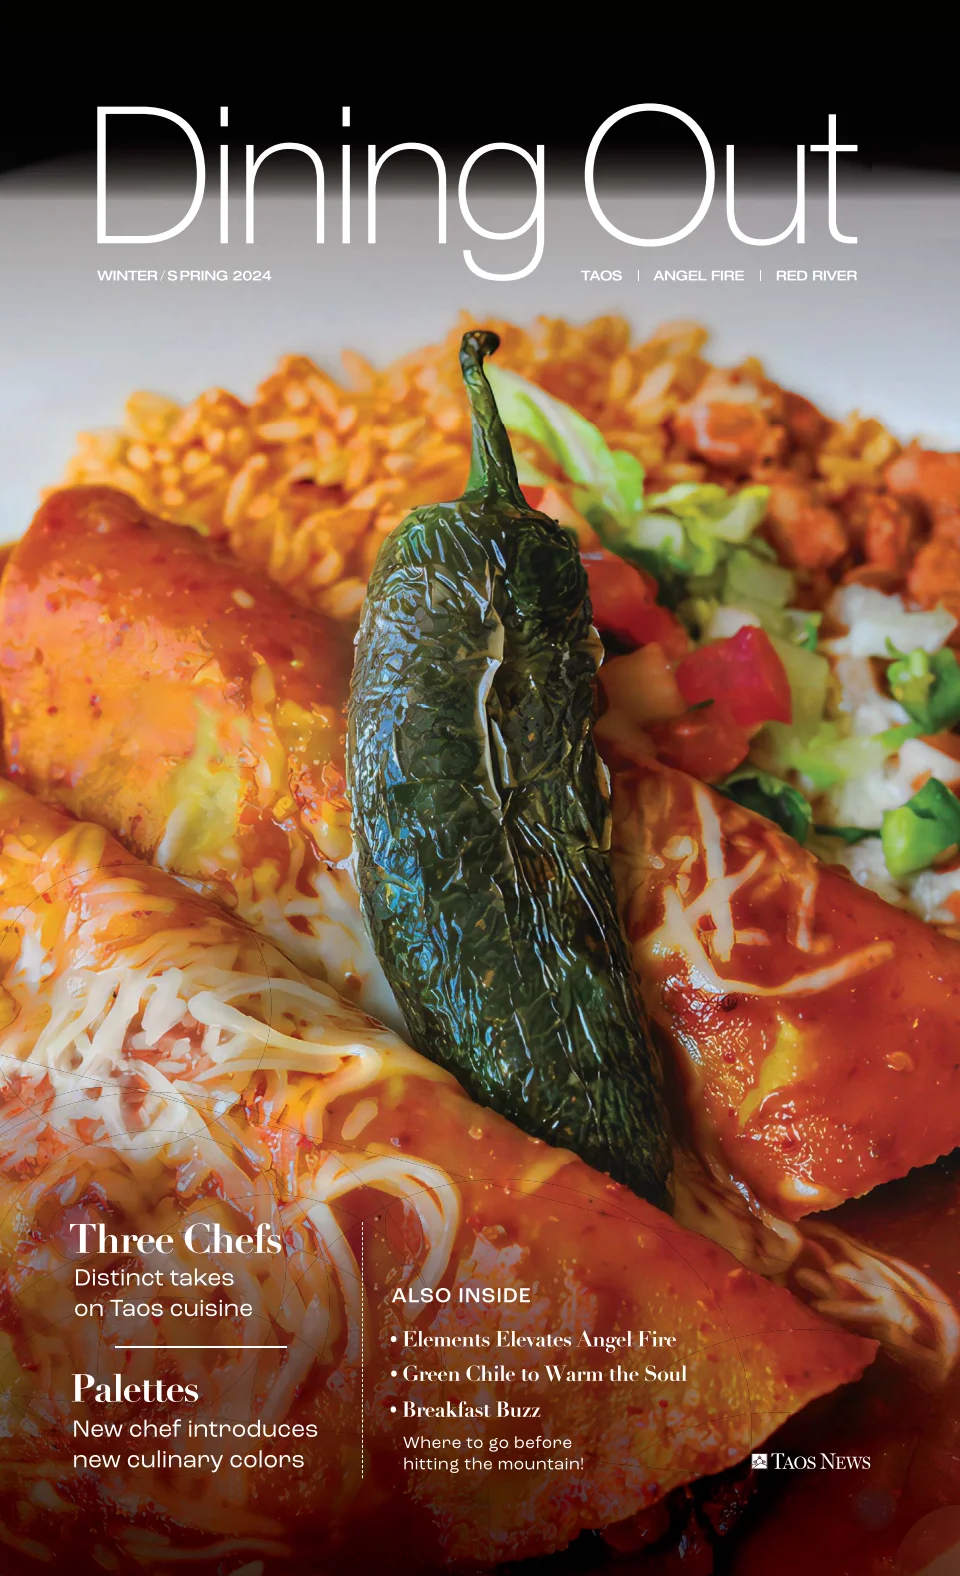 The Taos News - Dining Out